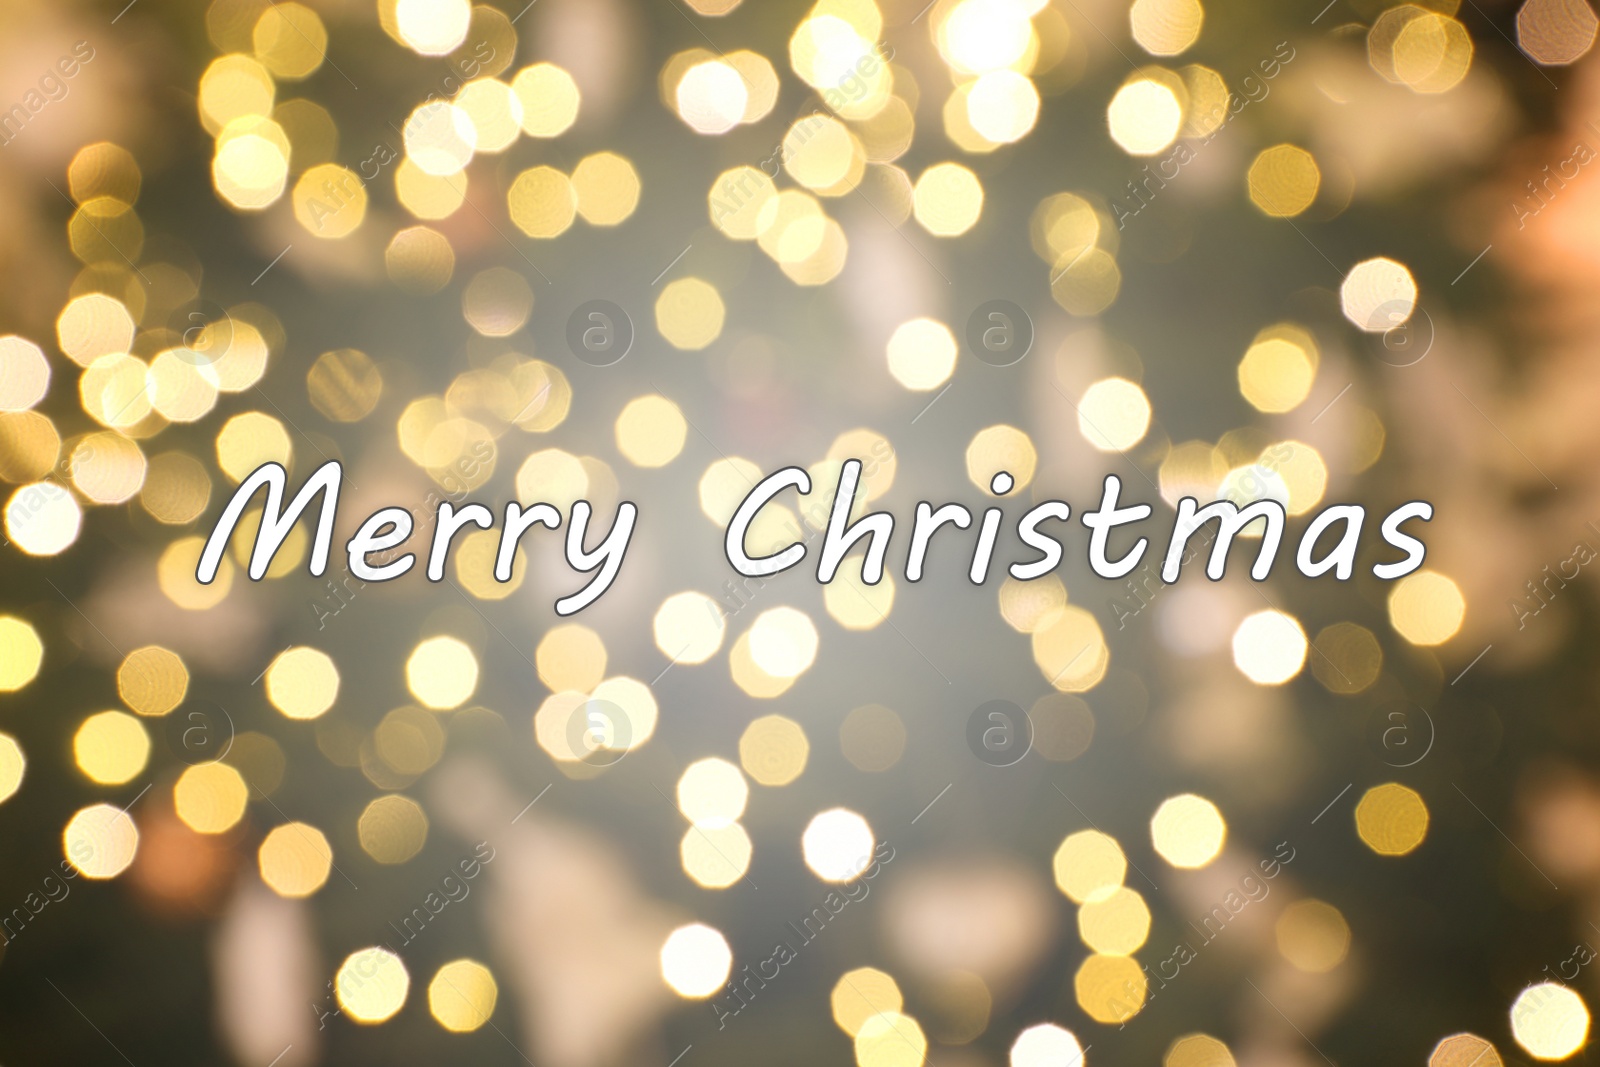 Image of Greeting card with phrase Merry Christmas on background with golden blurred lights